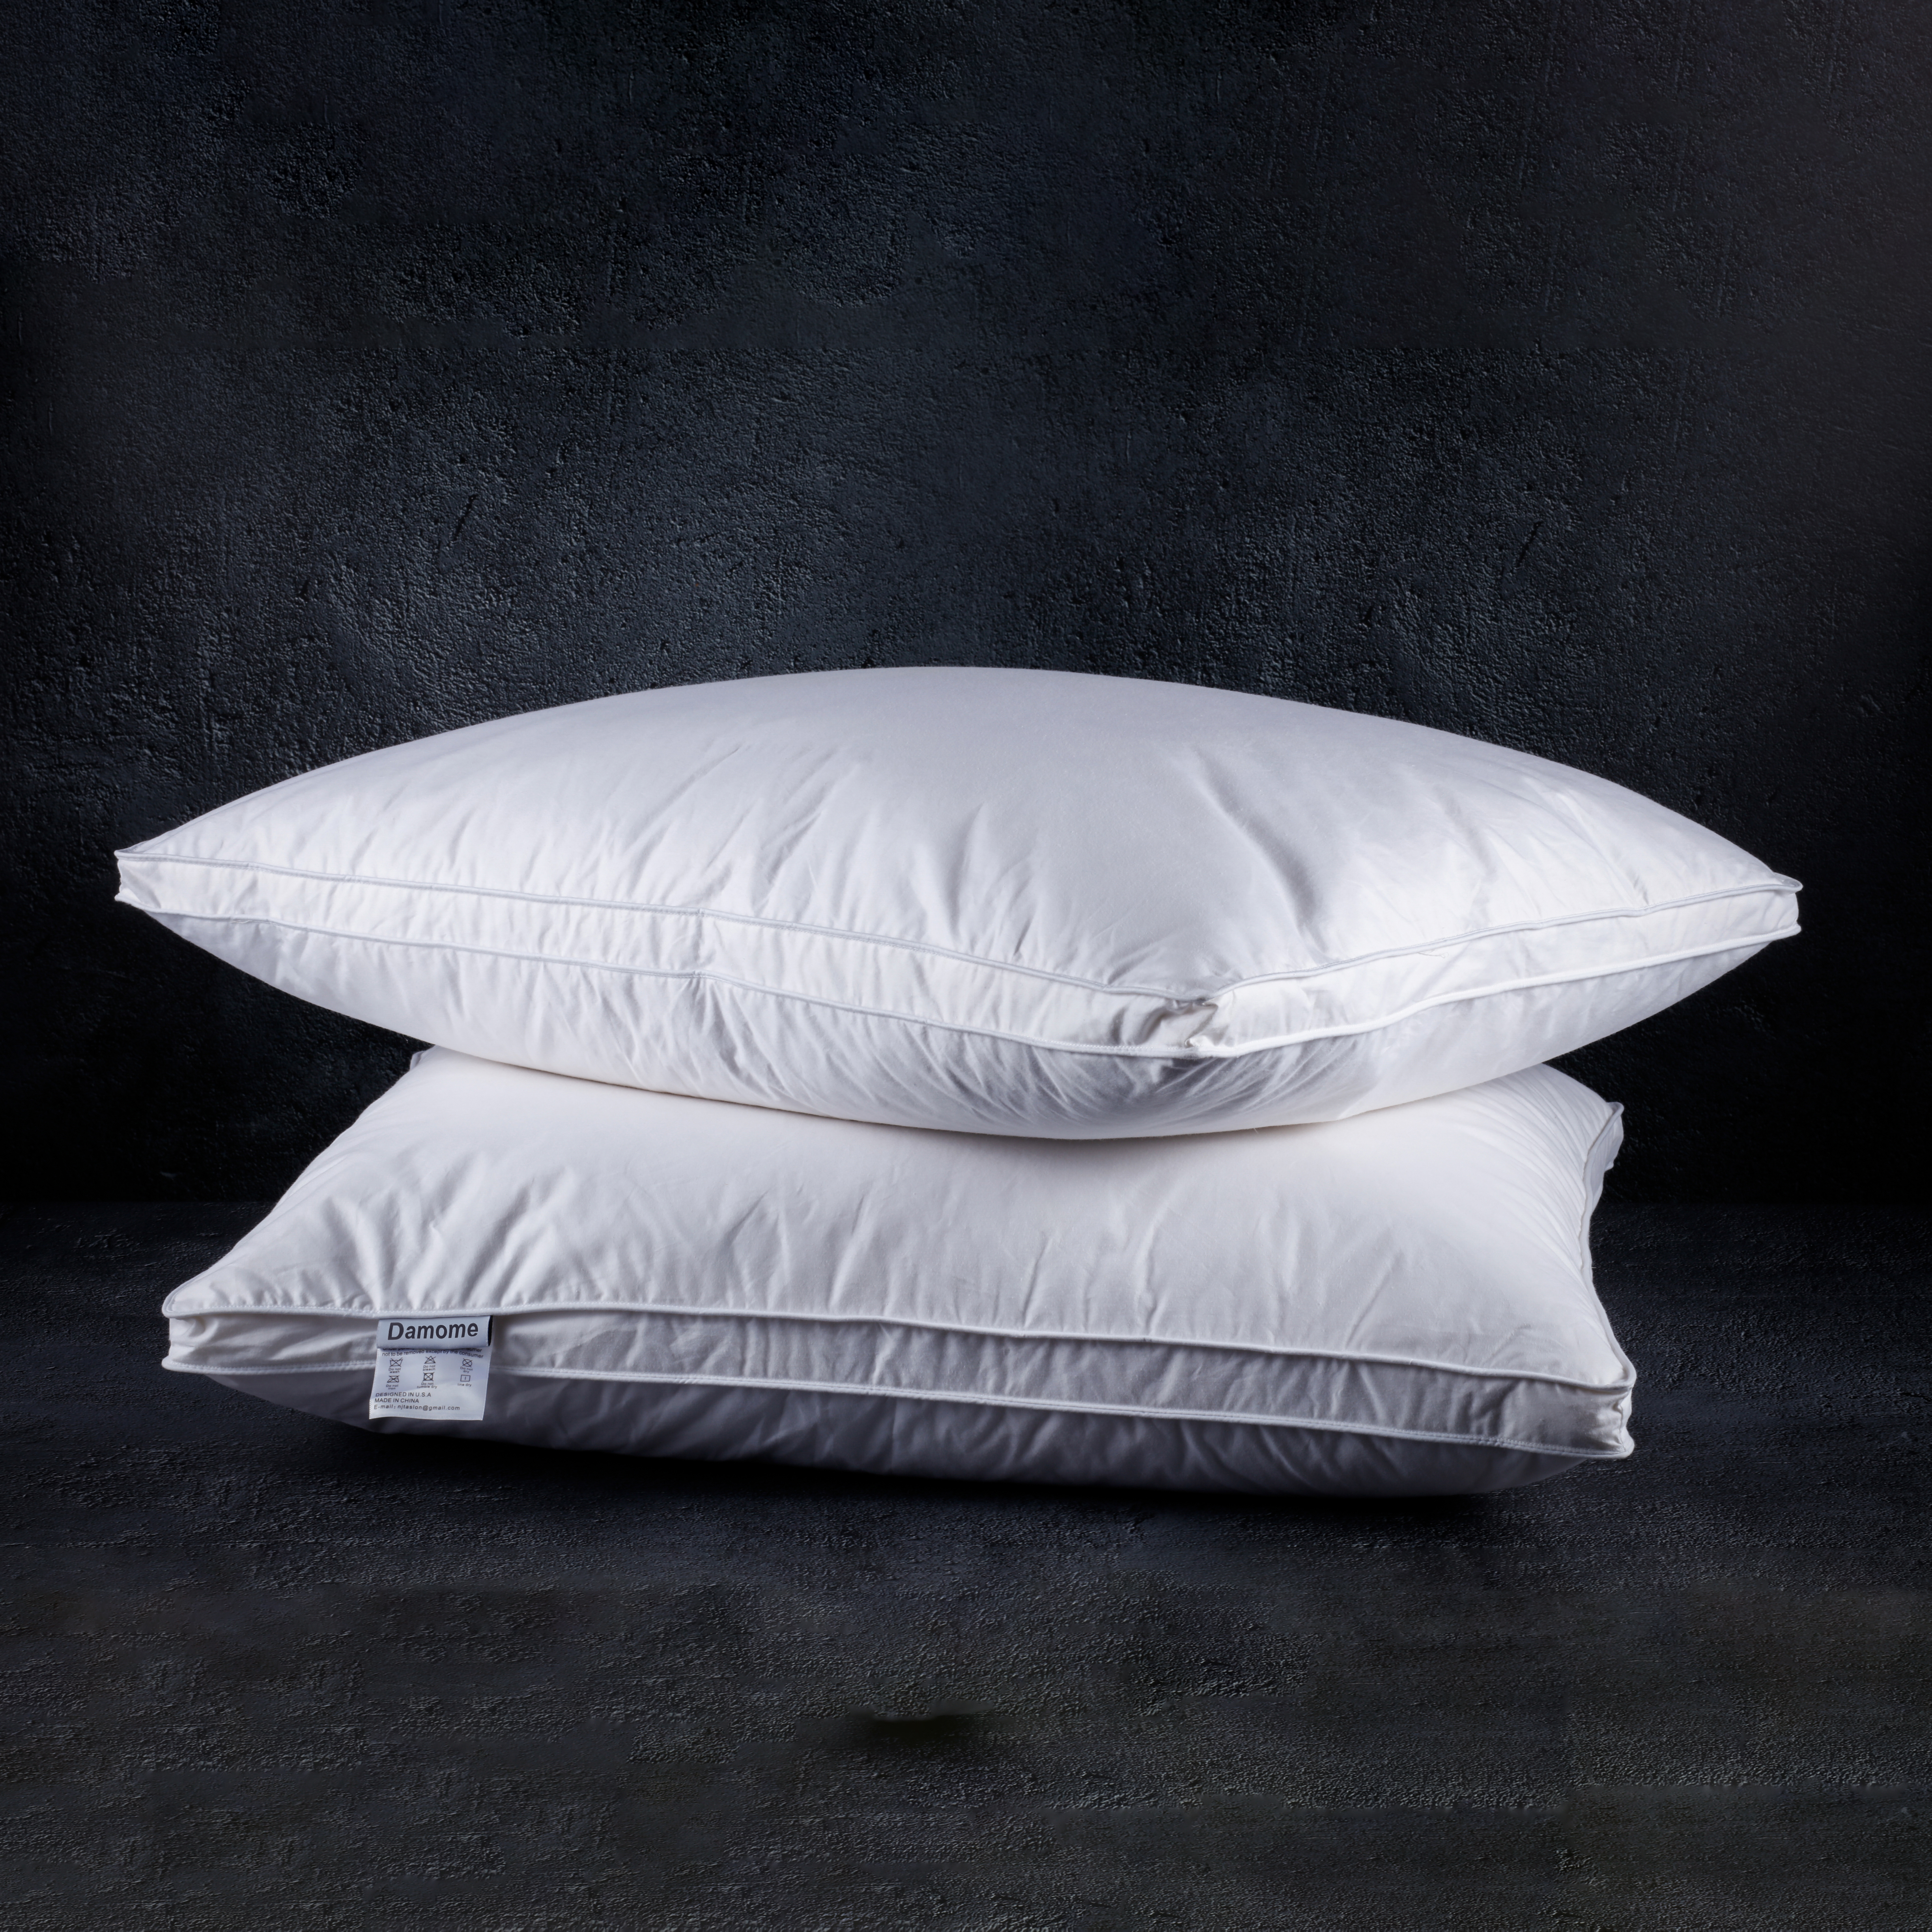 Damome Size: King Down Pillows for Sleeping(2 Pack), King(20inx36in)-White Goose Down Feather Bed Pillow Inserts, 100% Brushed Cotton Cover 40s/2, 233 Thread Count, Lightweight, for All Sleep 